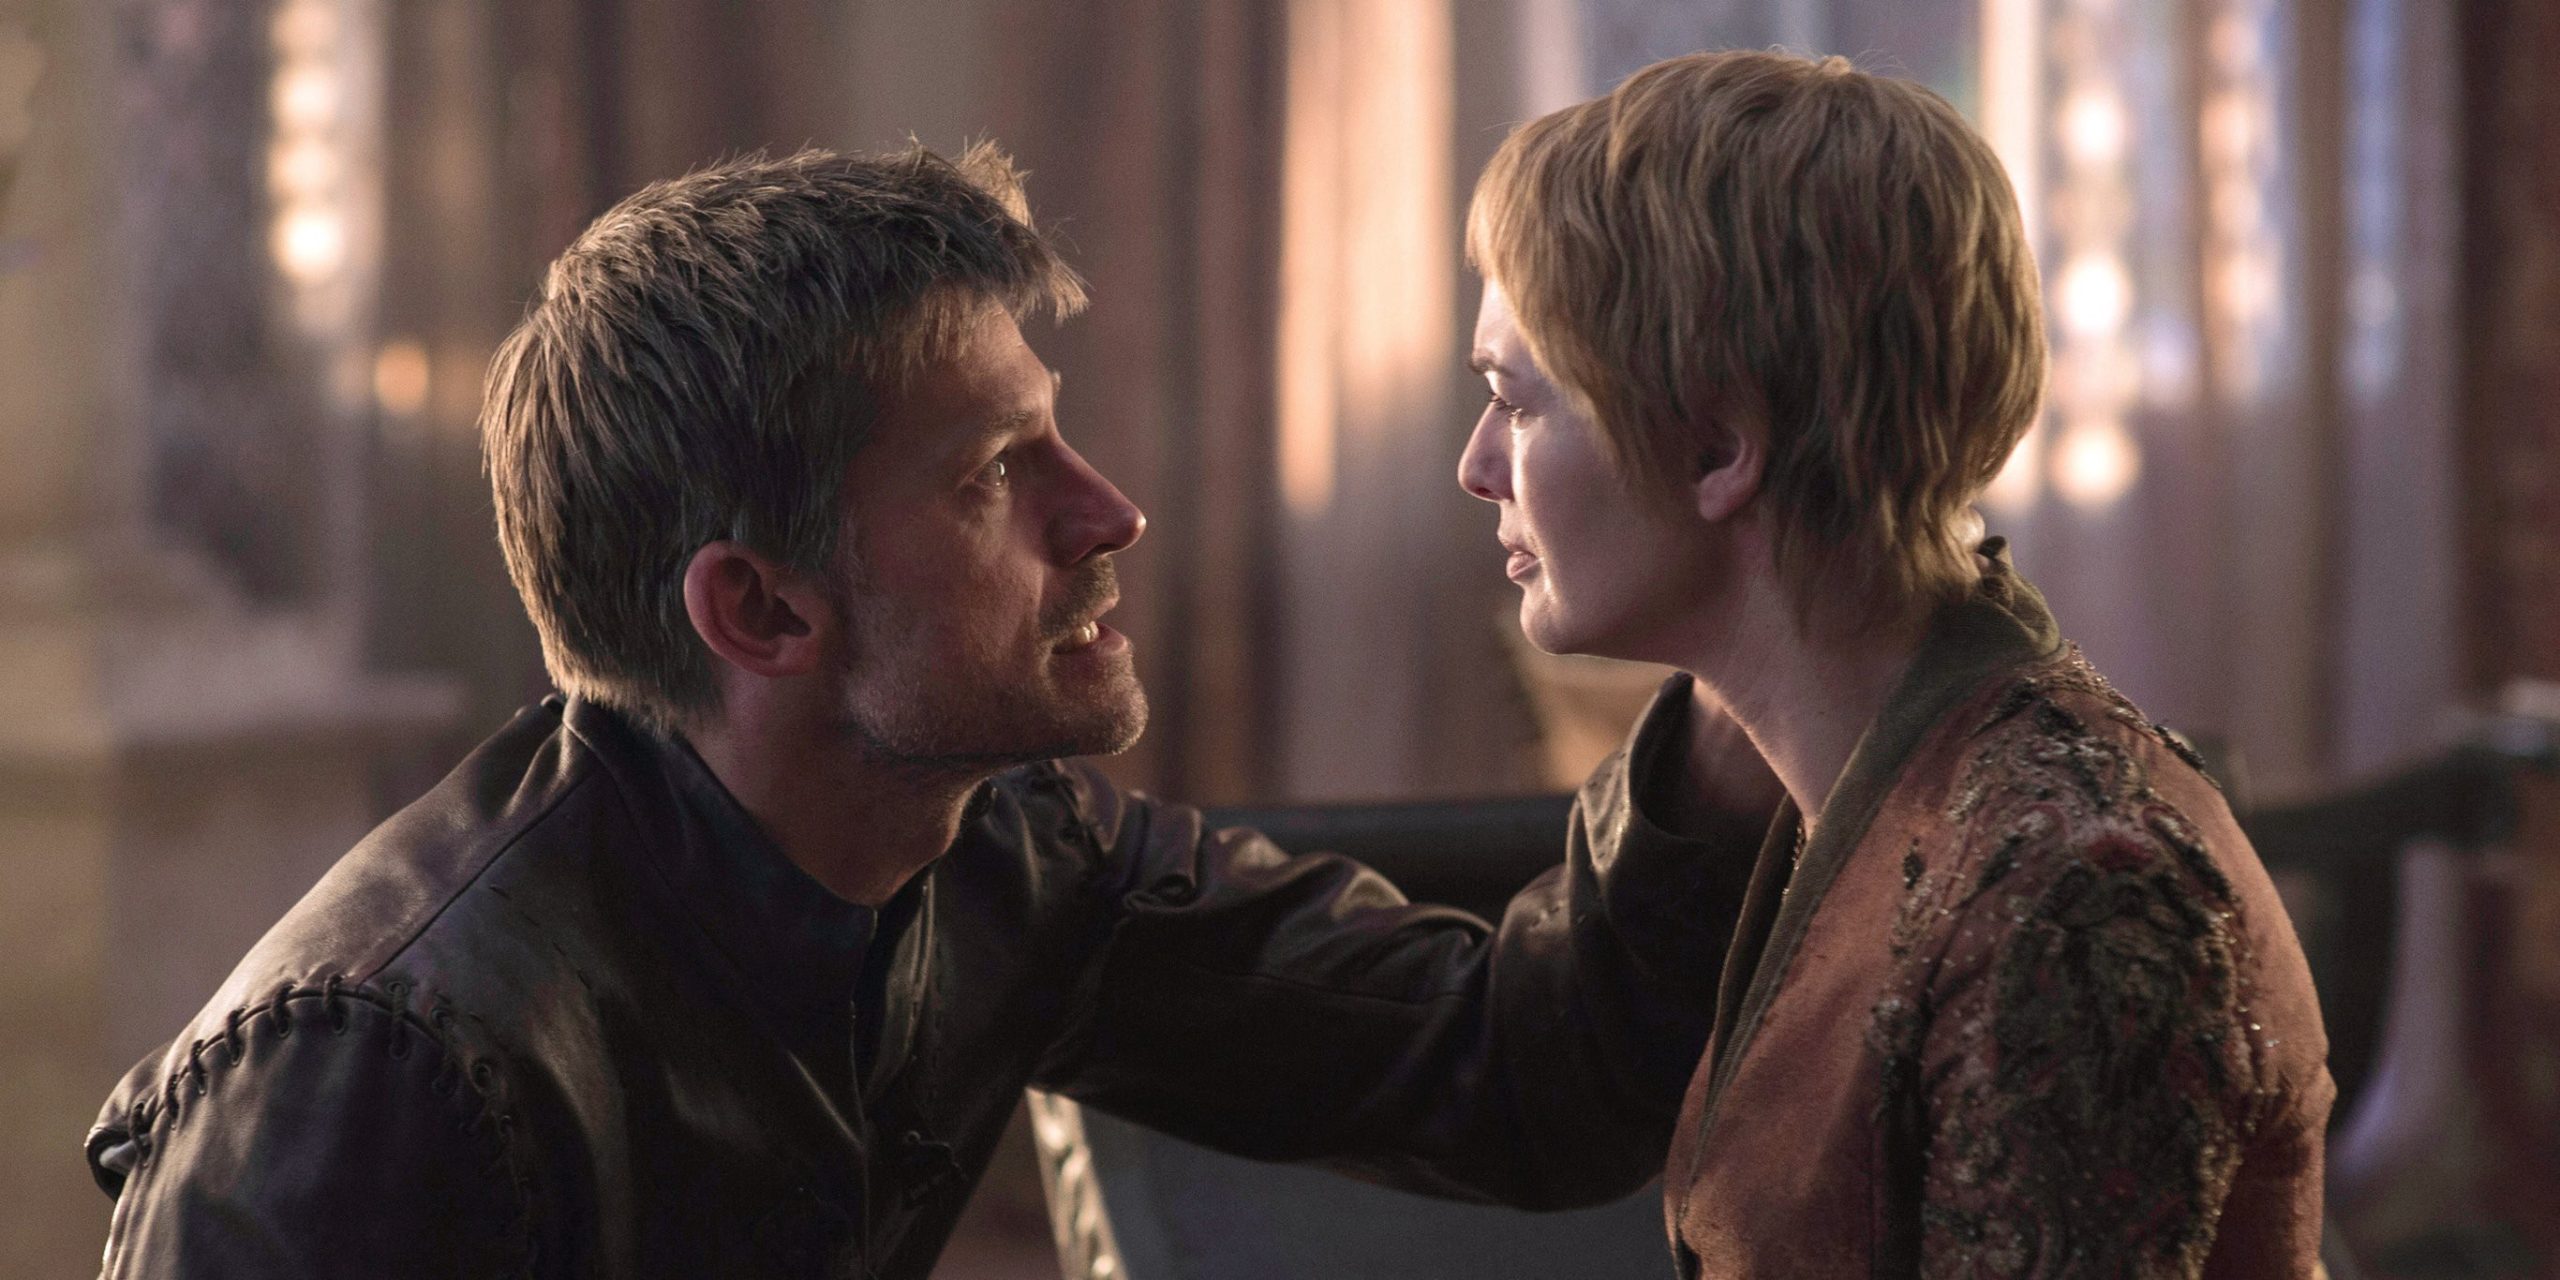 The love between Cersei and Jaime Lannister